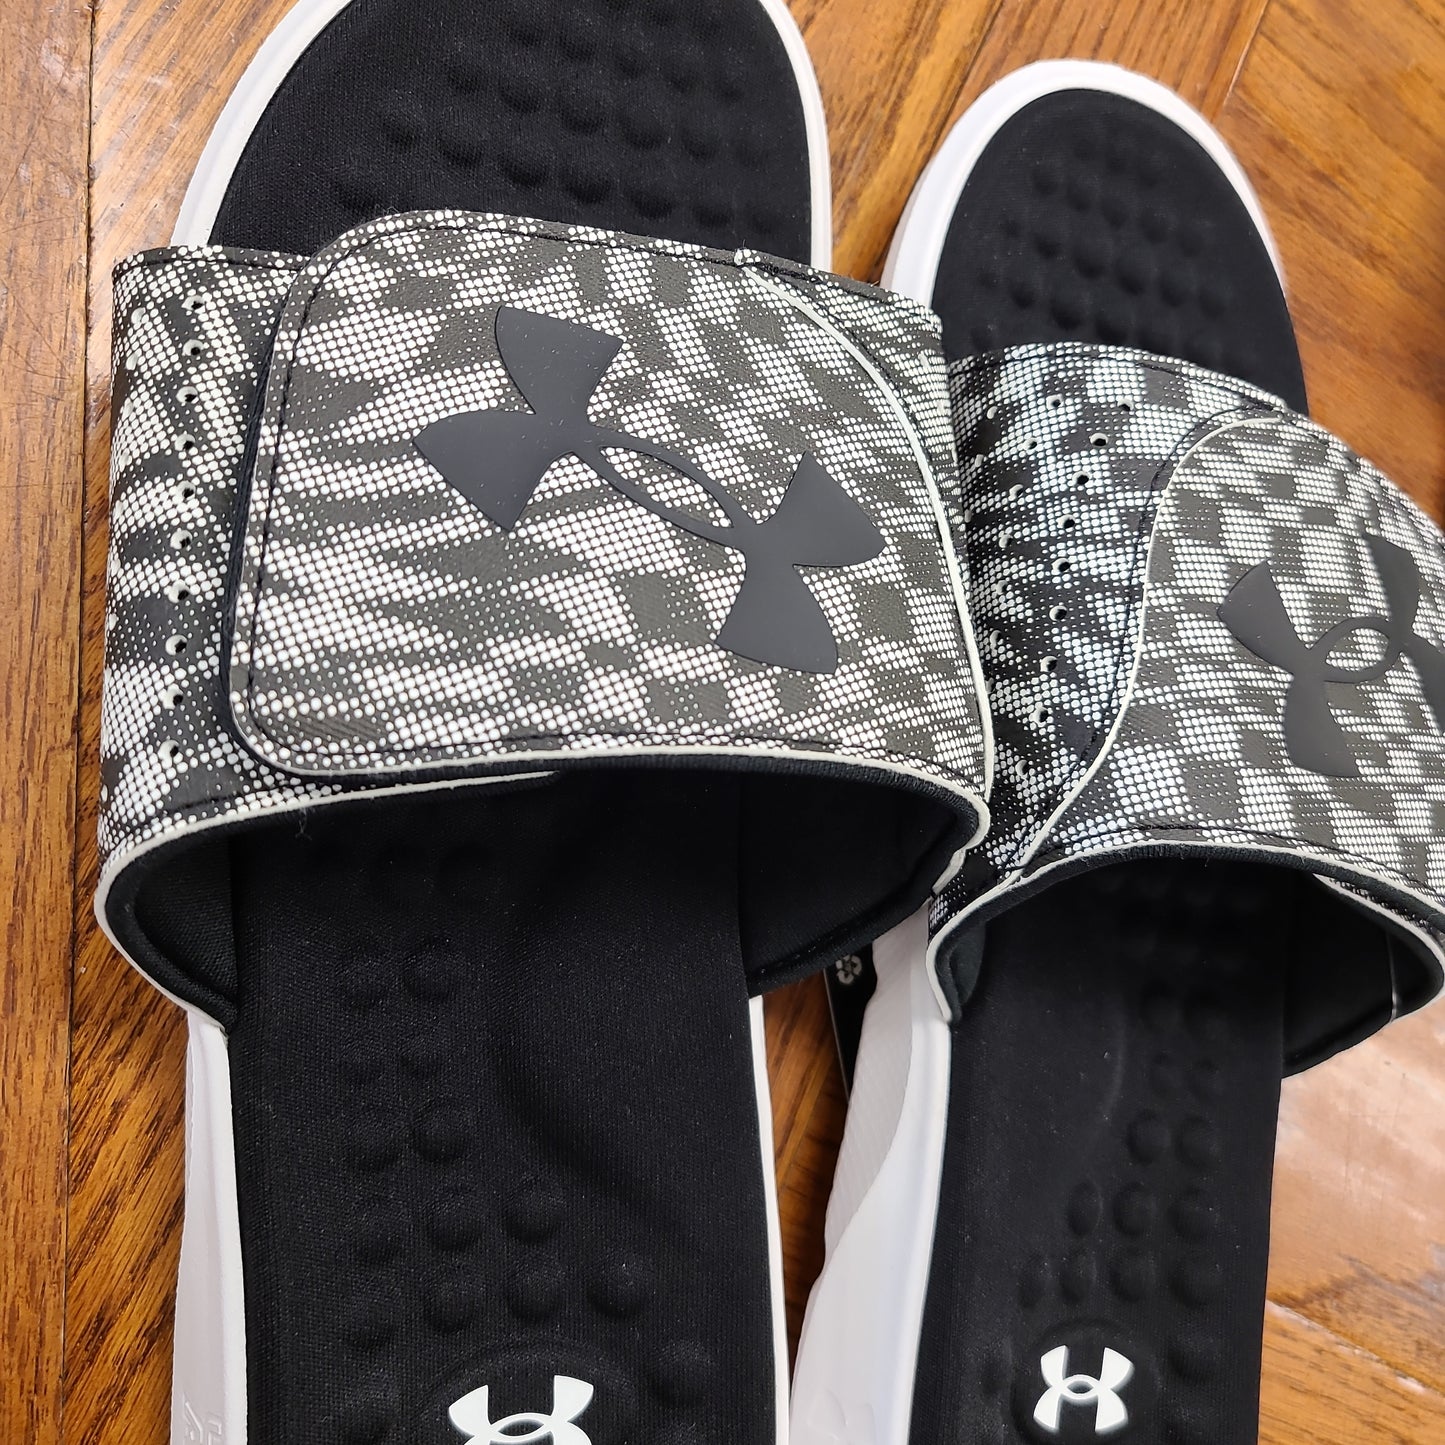 CLEARANCE Under Armour M Ignite Graphic Strap Slide Black/White Race Check Mens